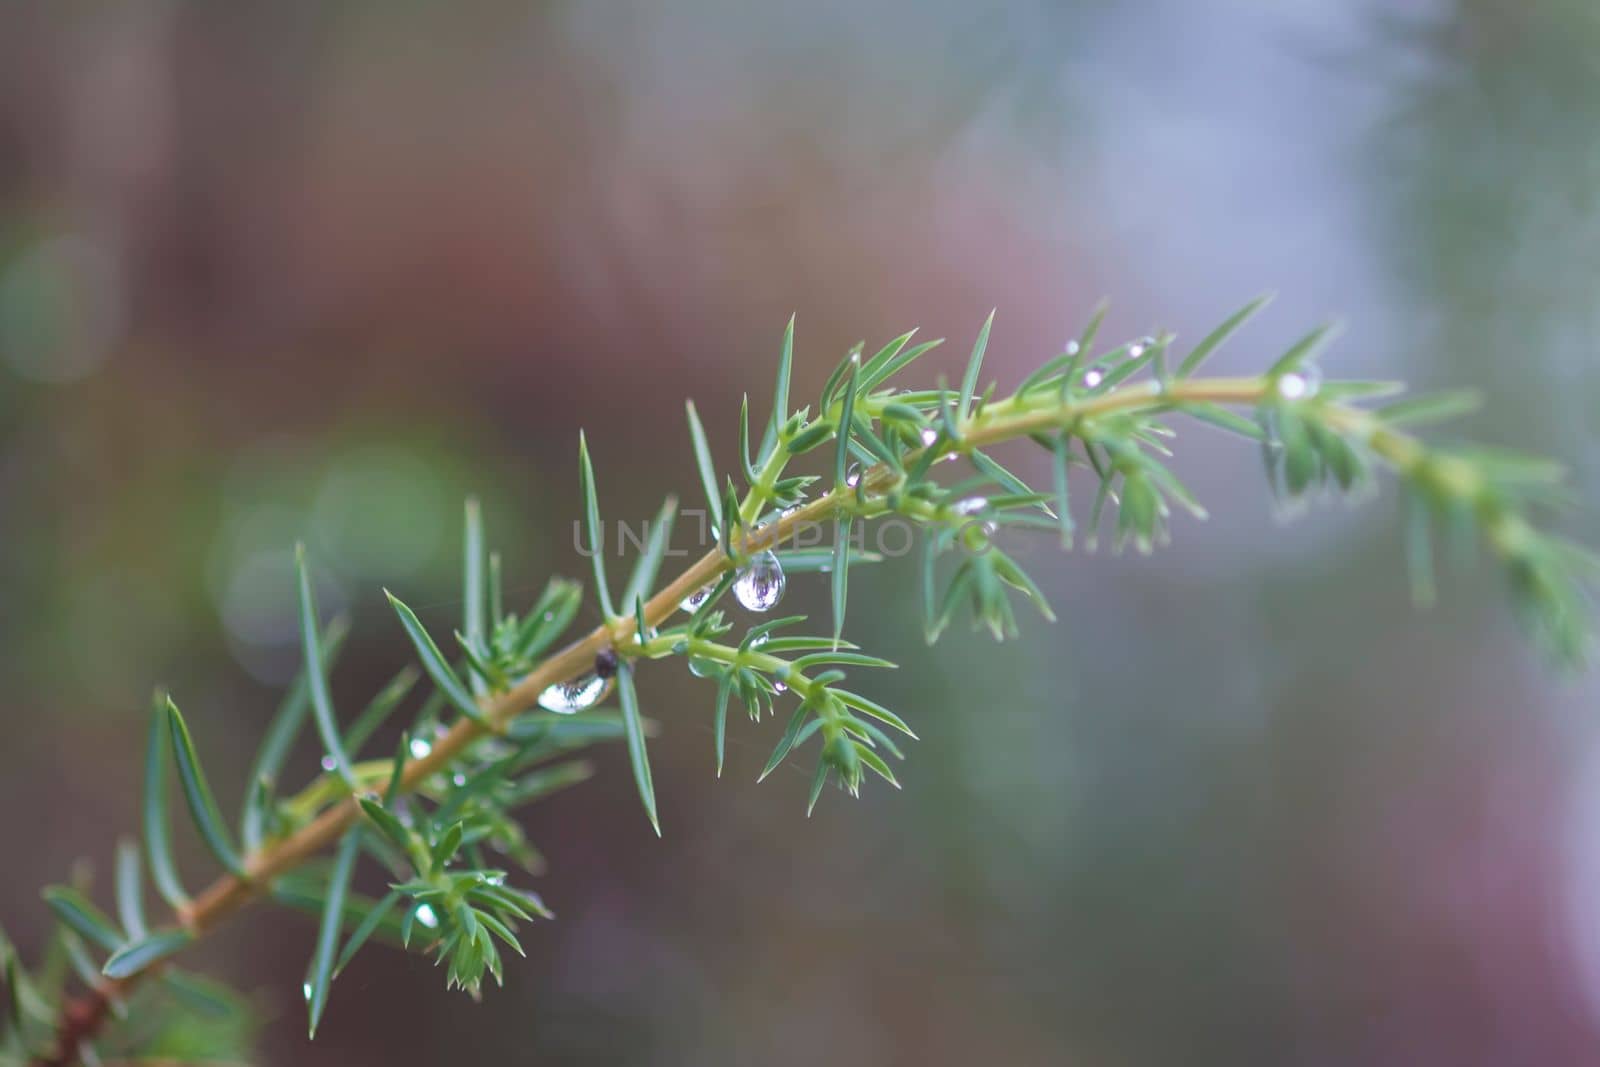 Wet branches of the spruce tree after the rain. Nature background.